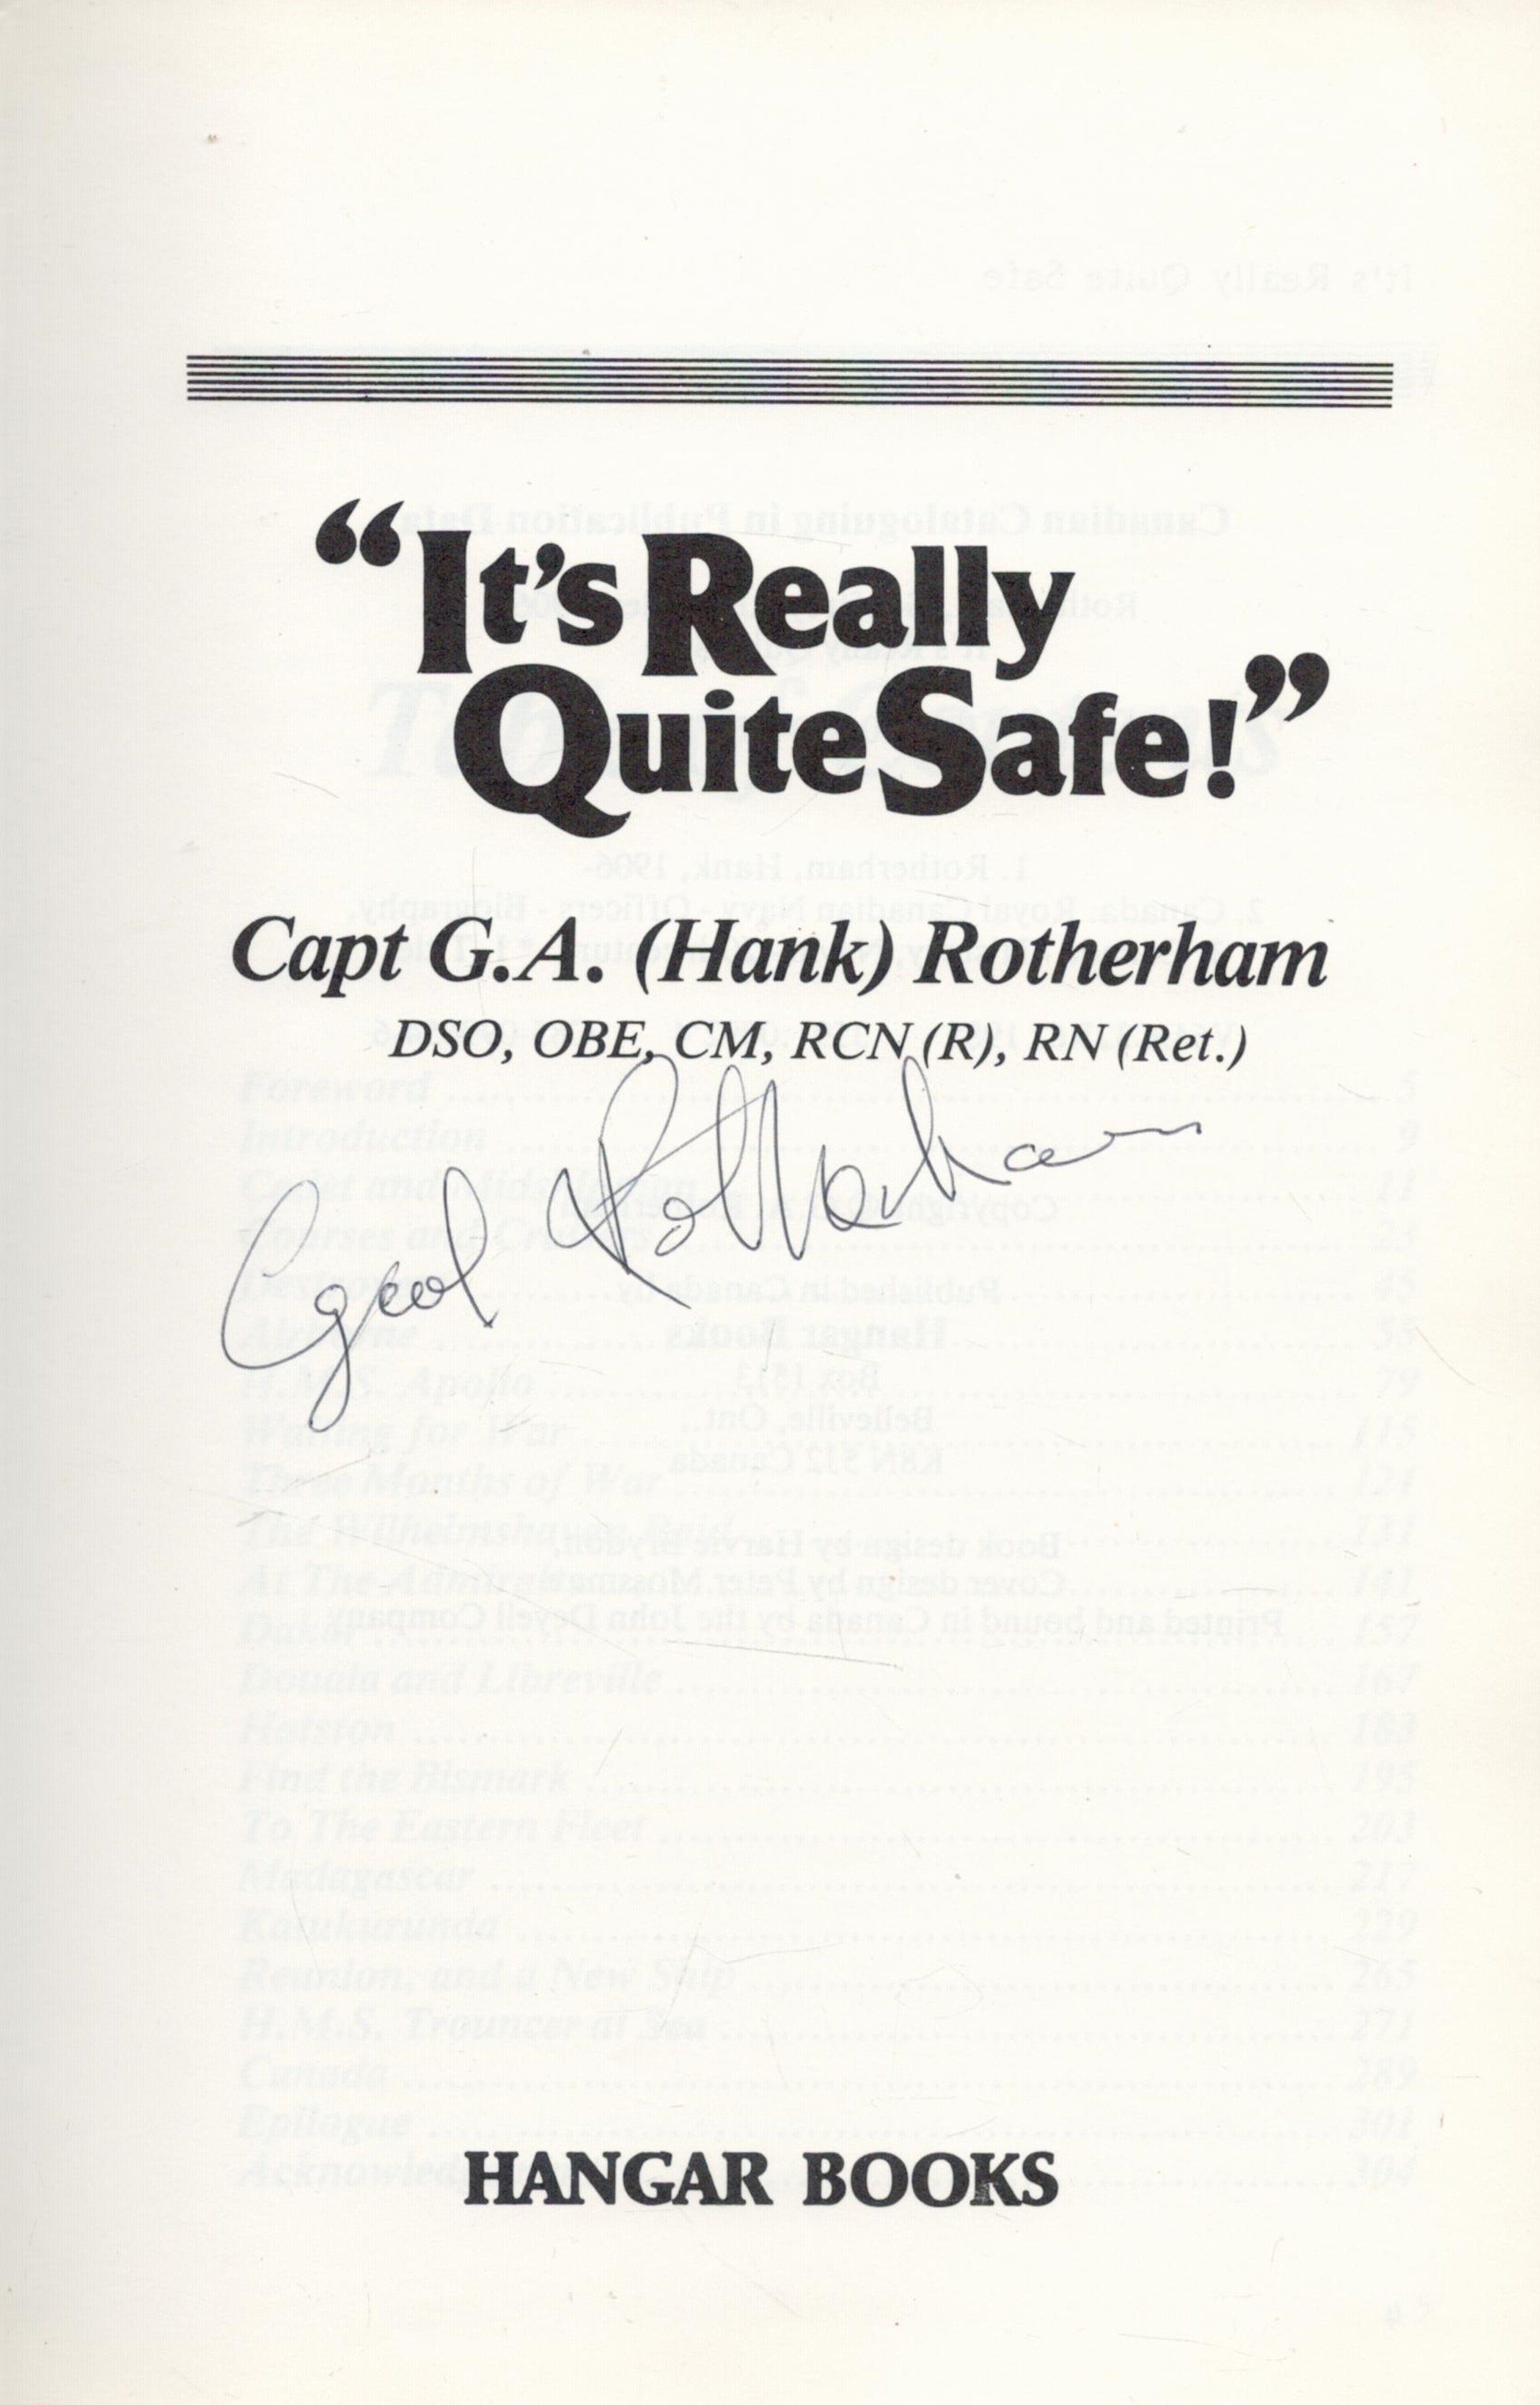 Captain G A (Hank) Rotherham Signed Book It's Really Quite Safe! by Captain G A (Hank) Rotherham DSO - Image 2 of 3